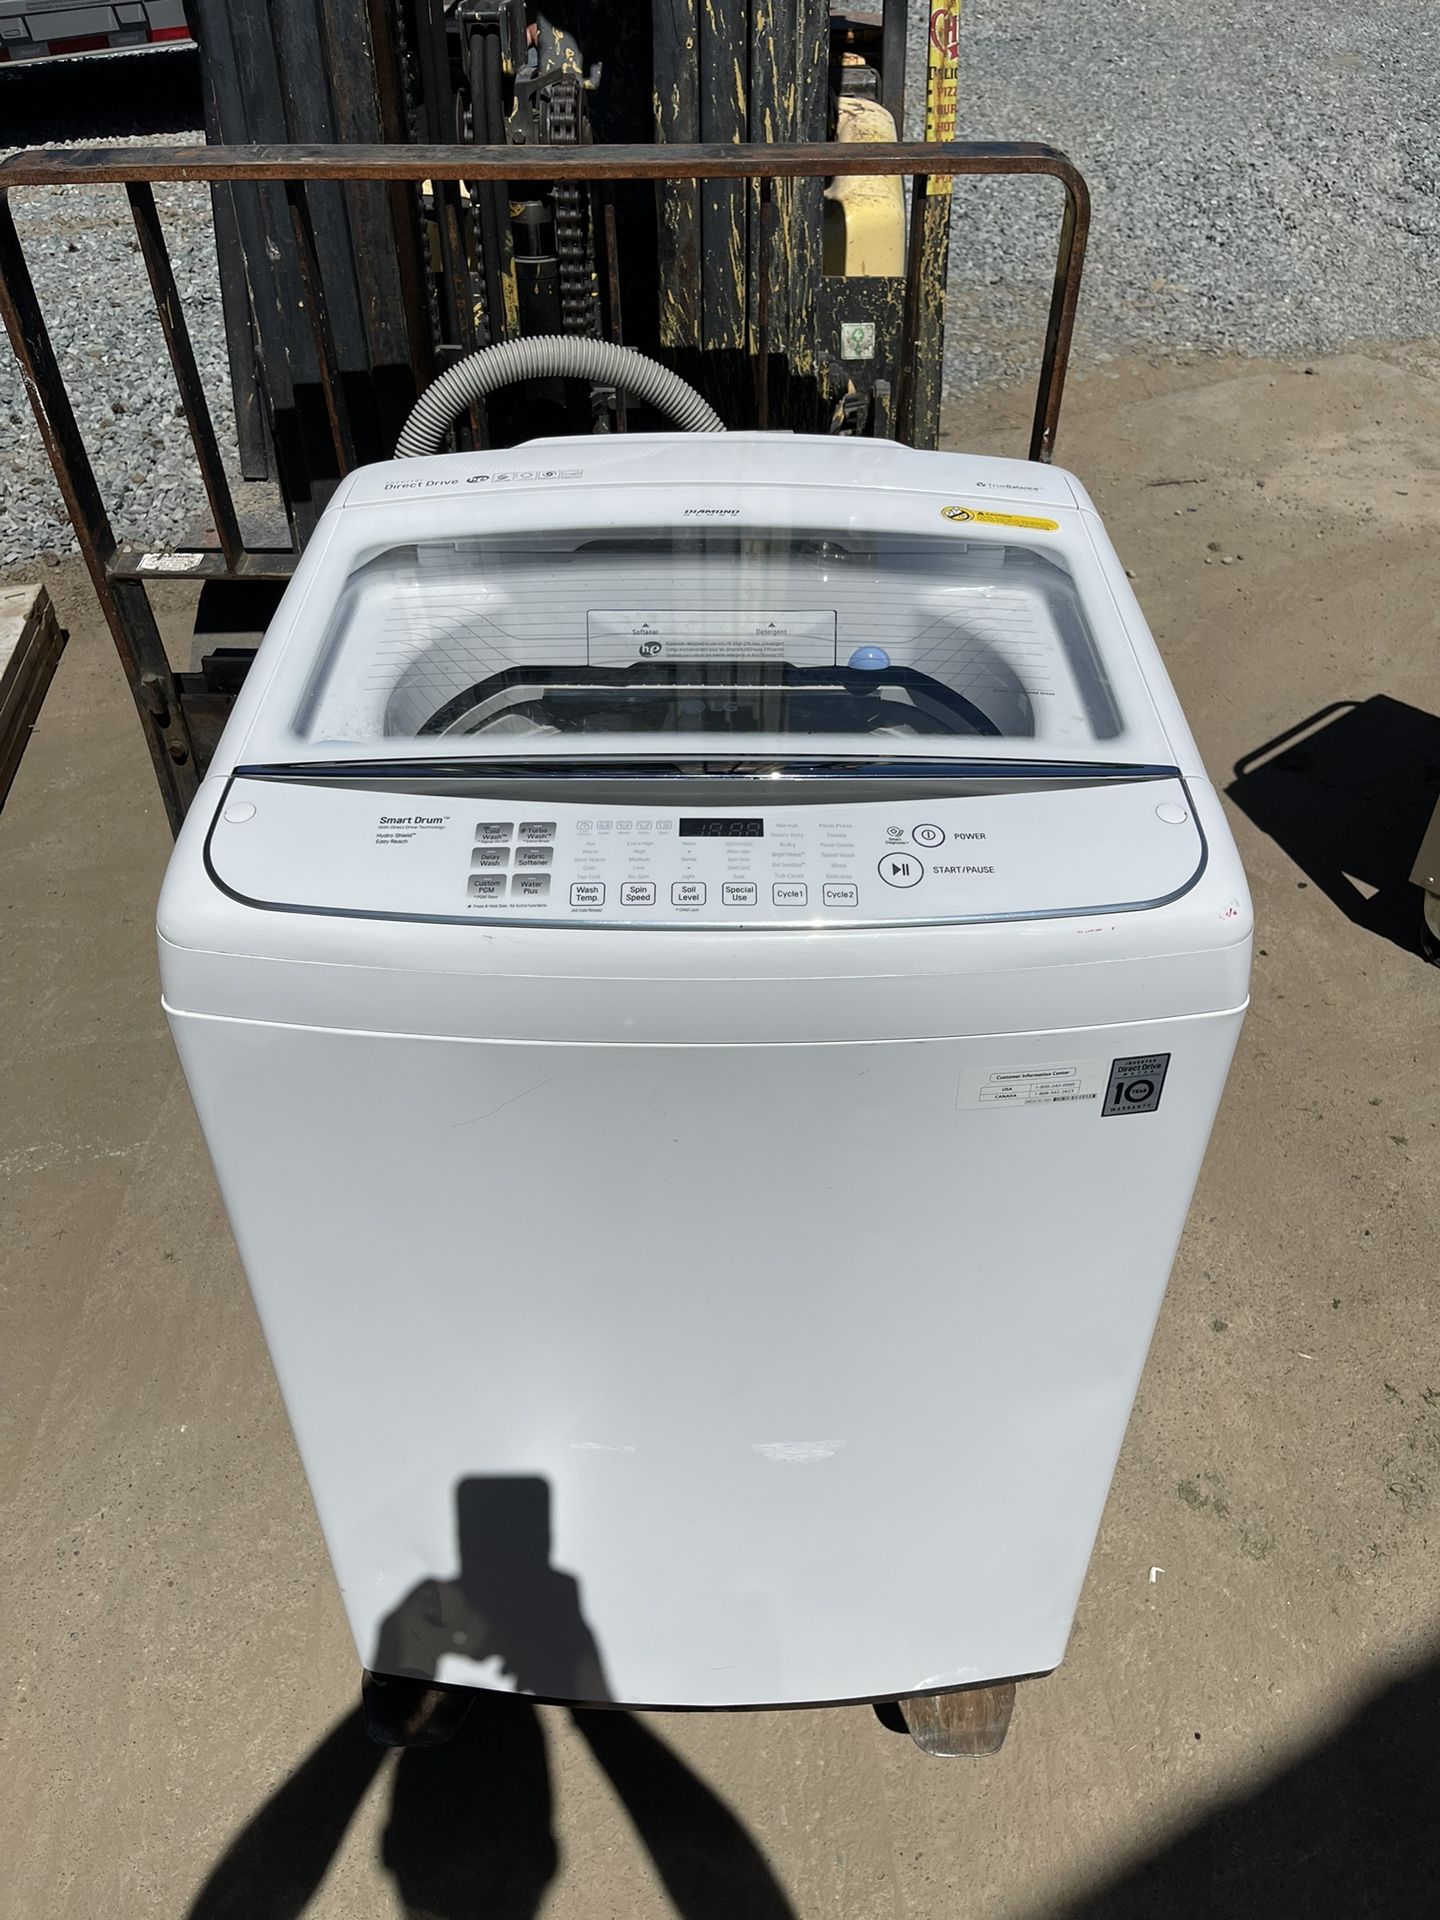 Lg Top Load Washer